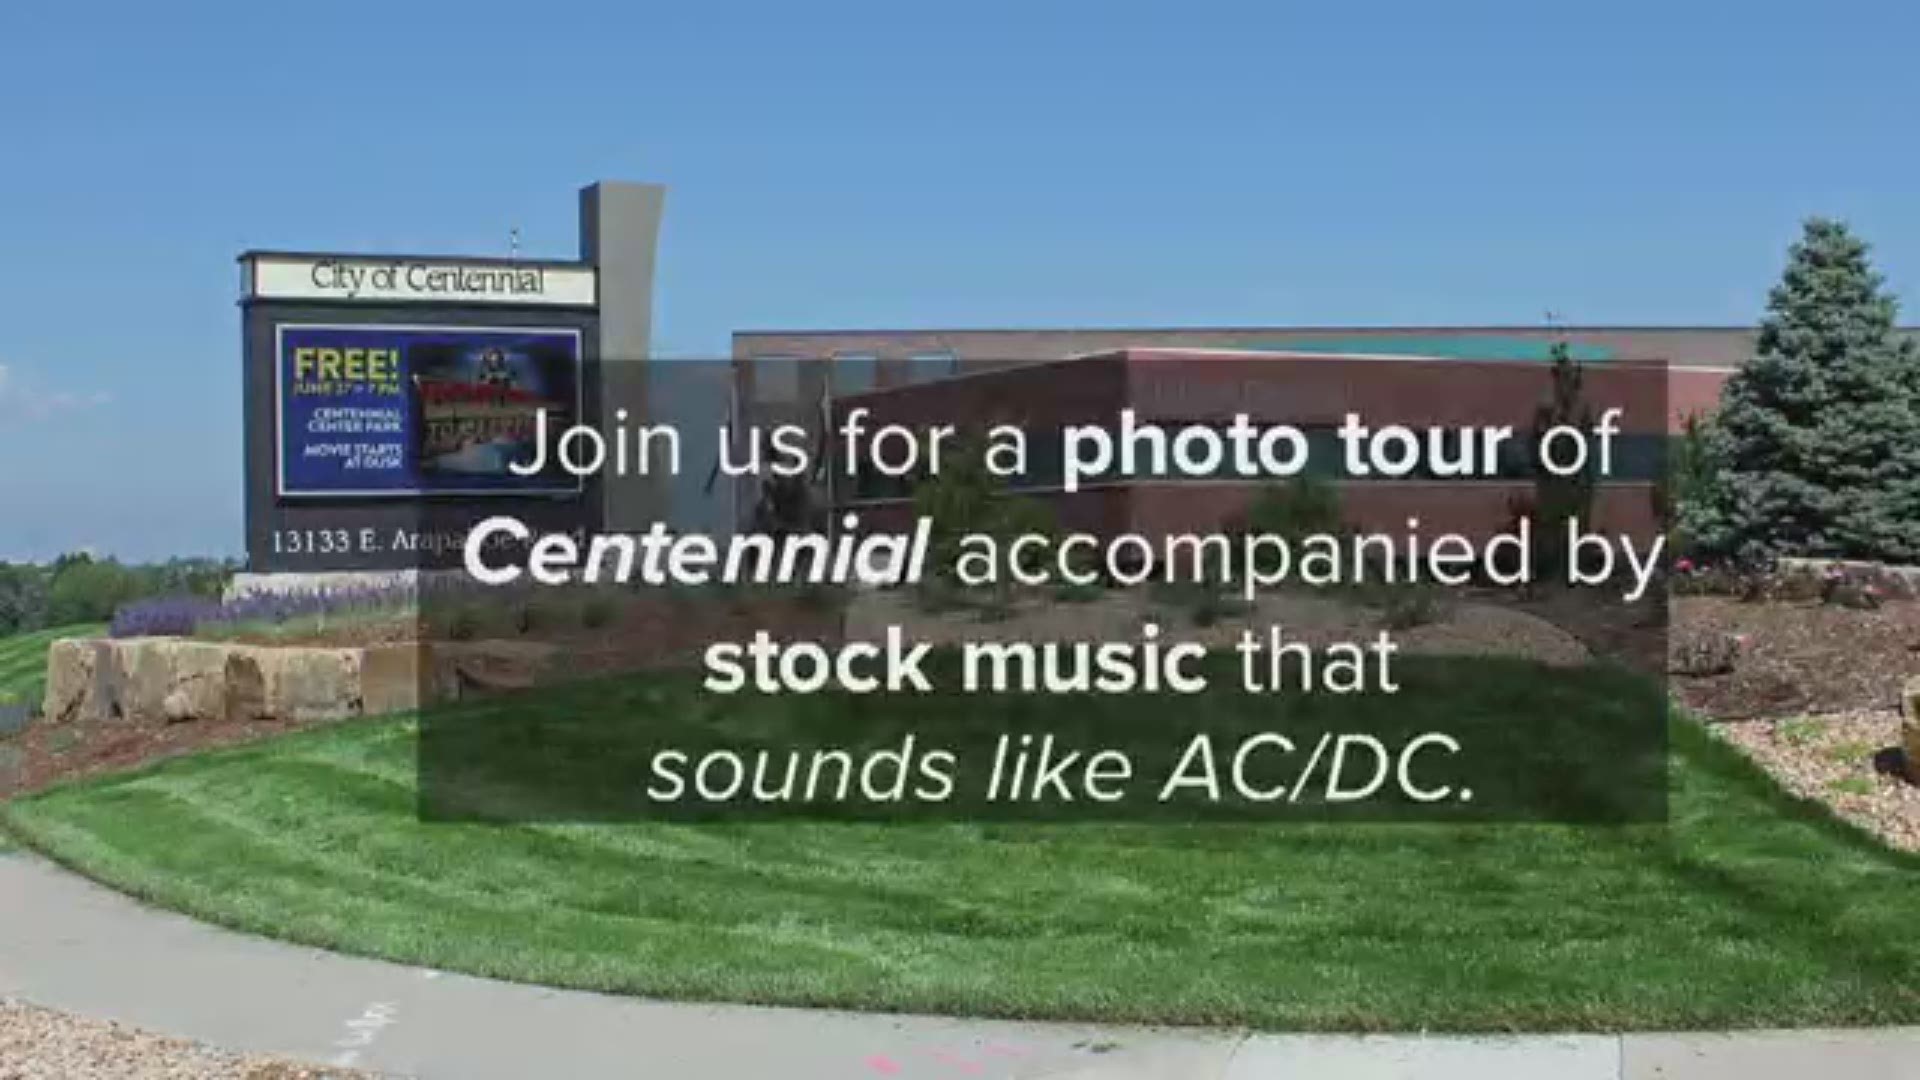 Centennial, Colorado is home to numerous open spaces, an epic park, and some small businesses worth checking out!